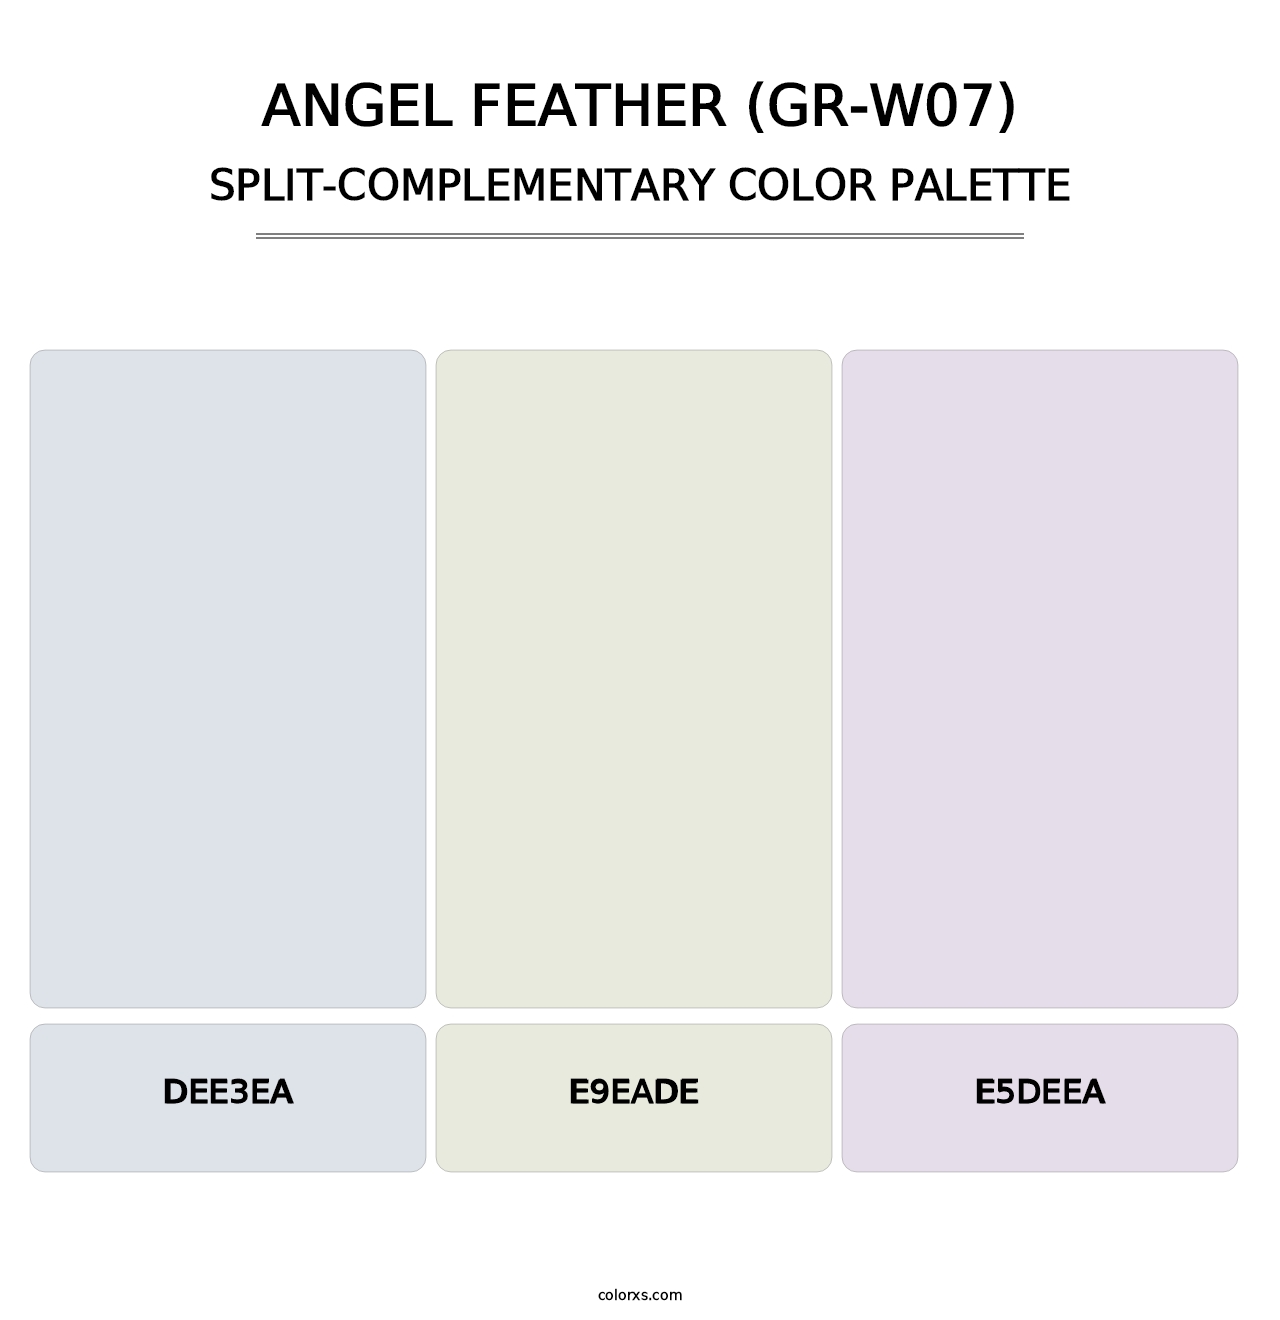 Angel Feather (GR-W07) - Split-Complementary Color Palette